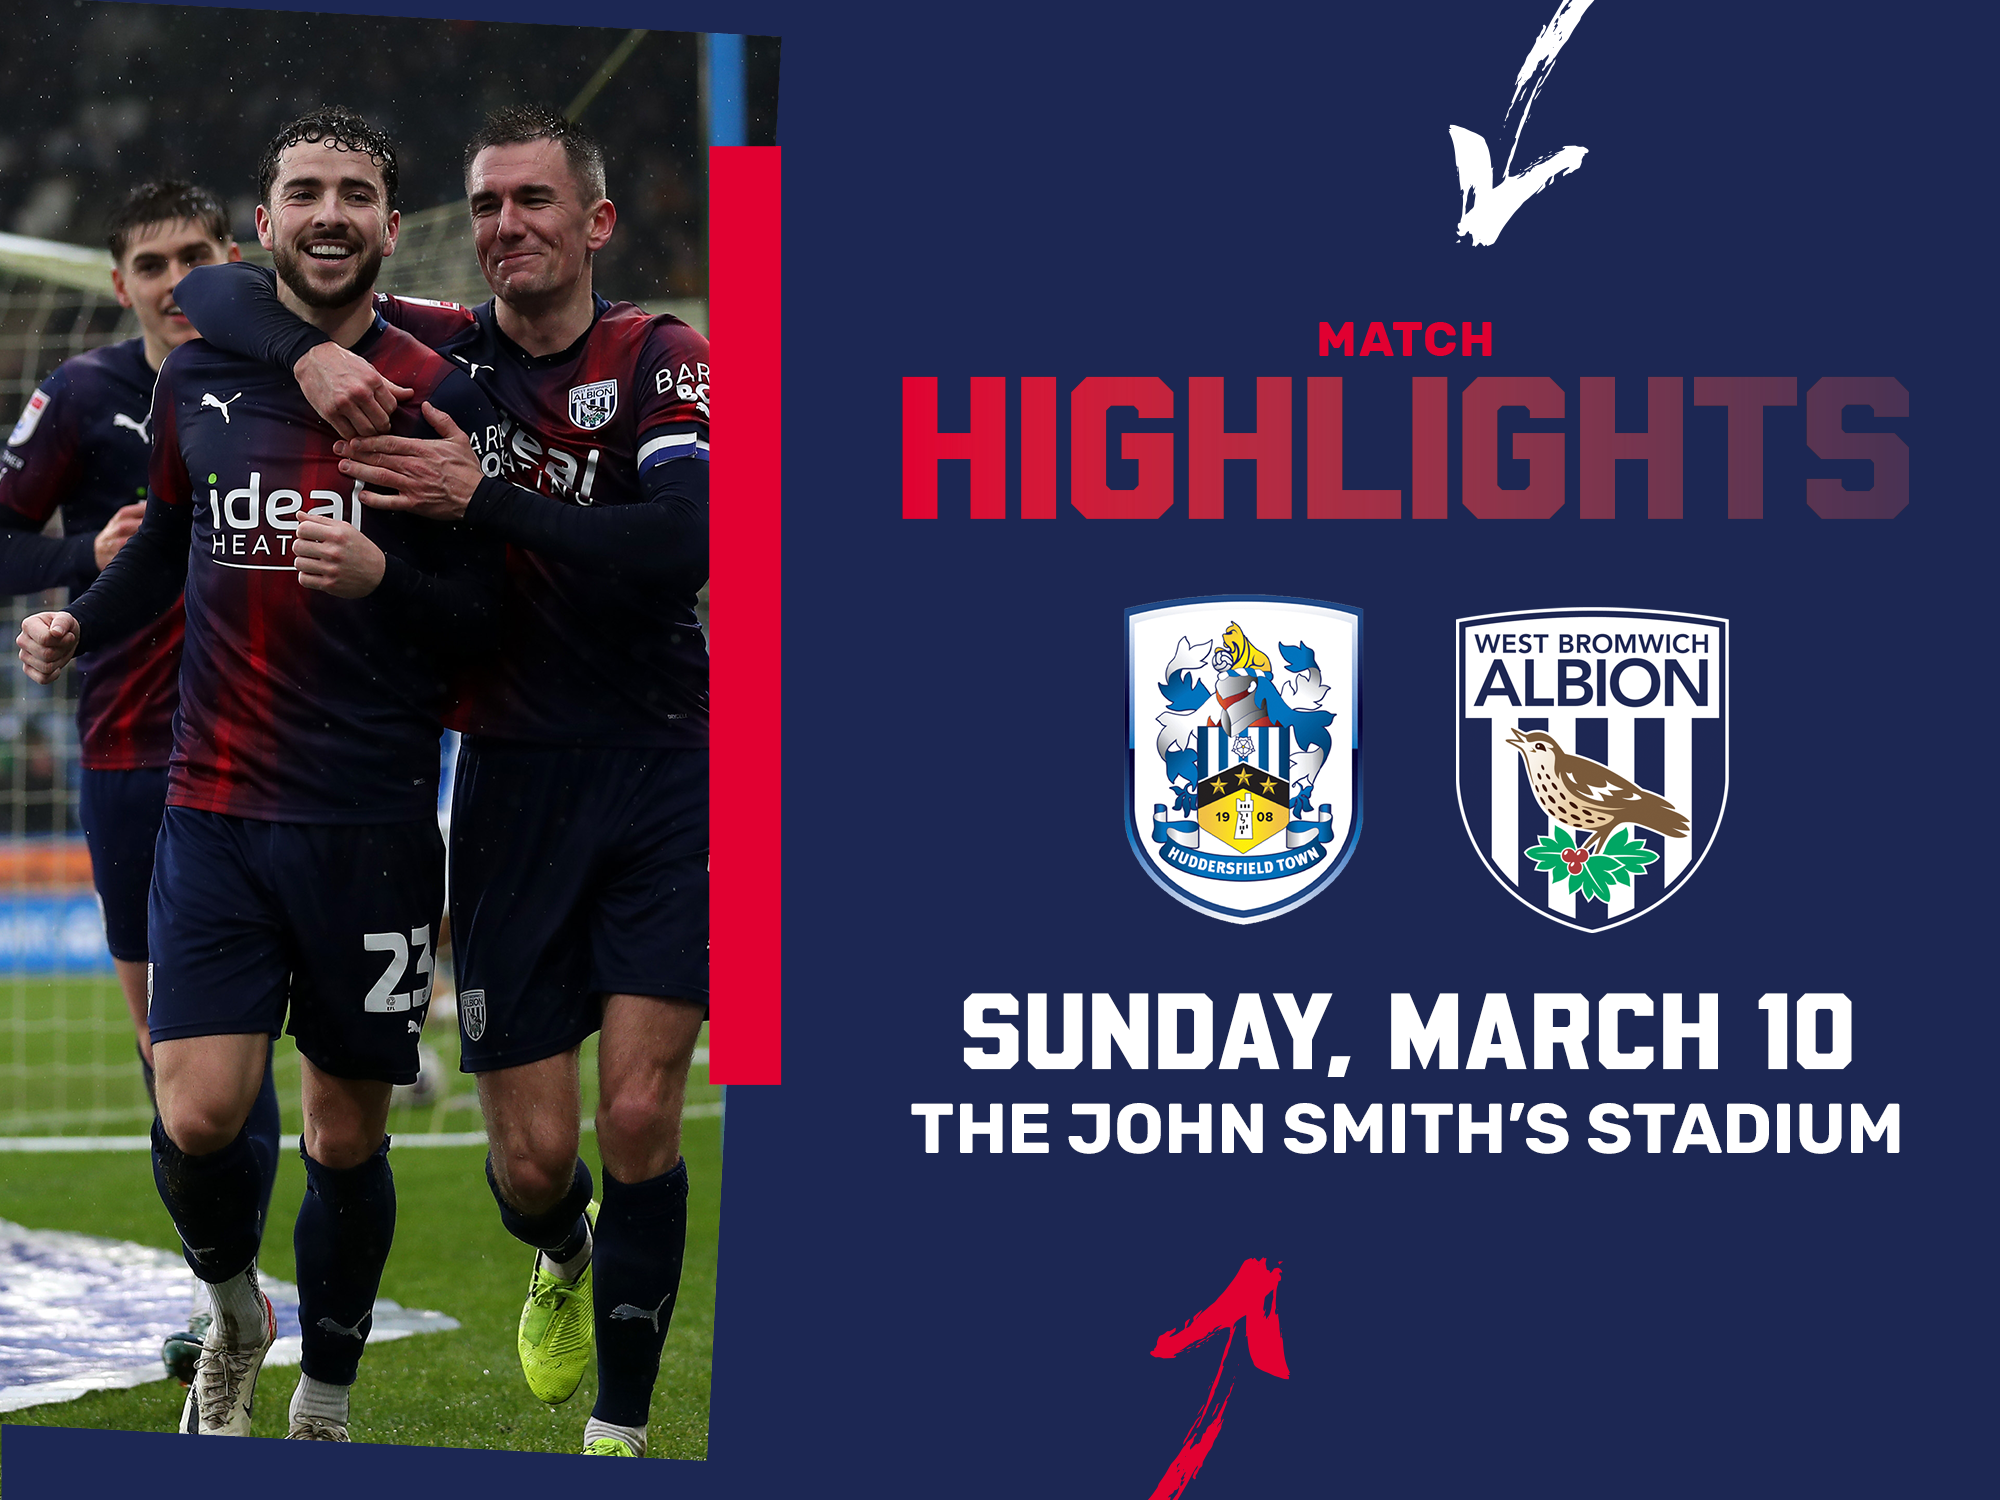 A photo highlights graphic, in the red and blue 23/24 away colours - showing the club crests of Huddersfield and Albion, along with a photo of Mike Johnston and Jed Wallace celebrating at the John Smith's Stadium